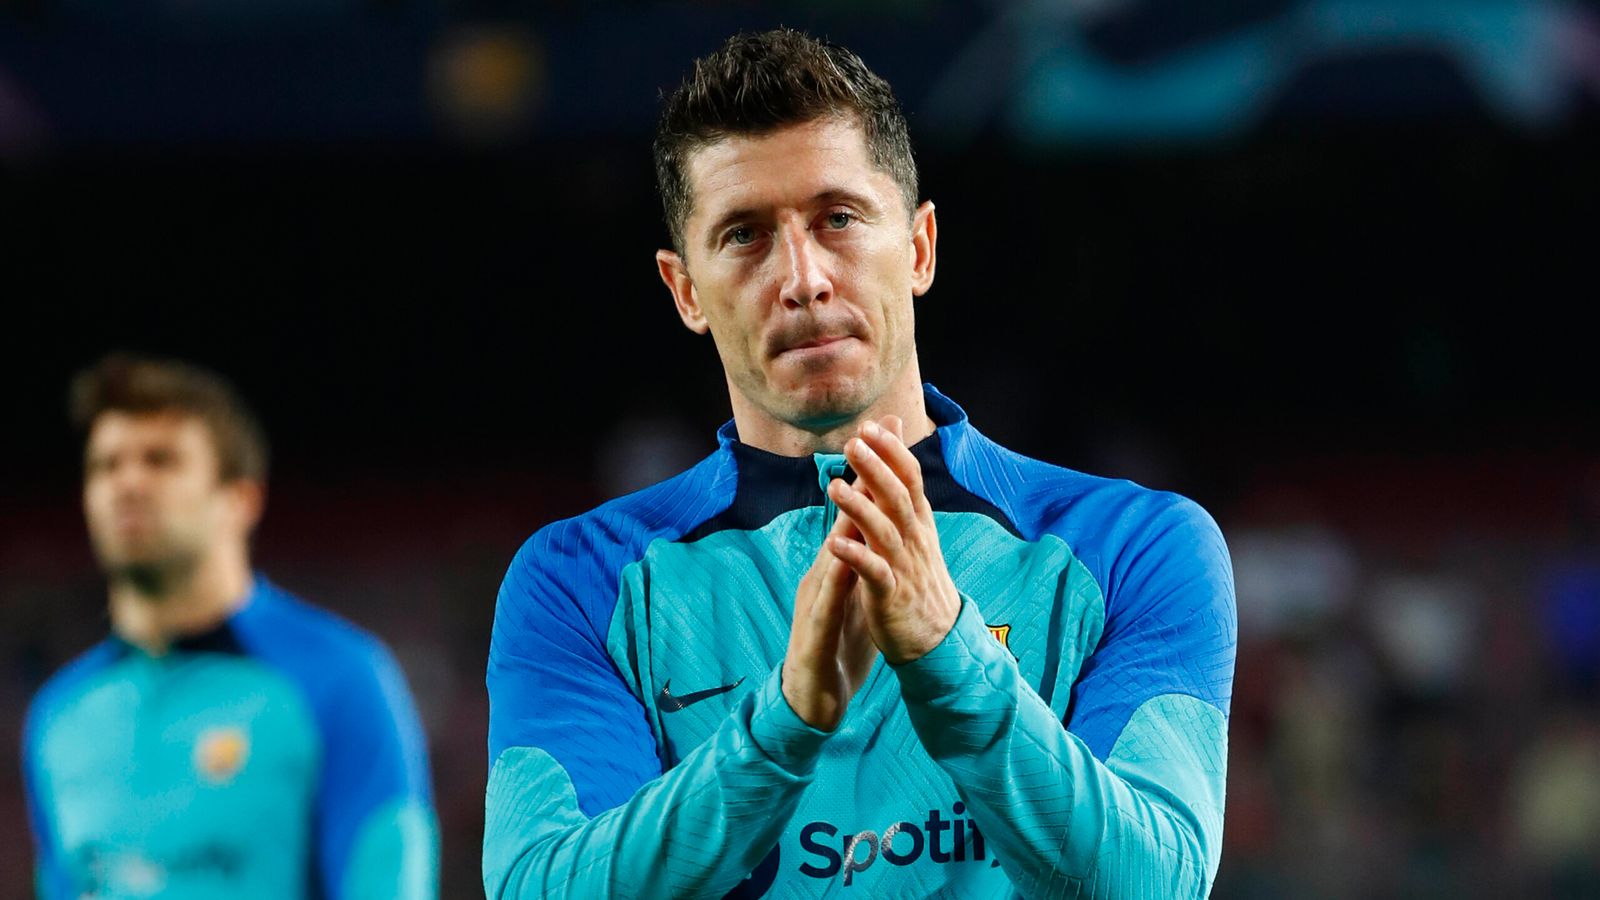 Barcelona's Robert Lewandowski was unable to prevent a 3-0 loss to his former side Bayern Munich